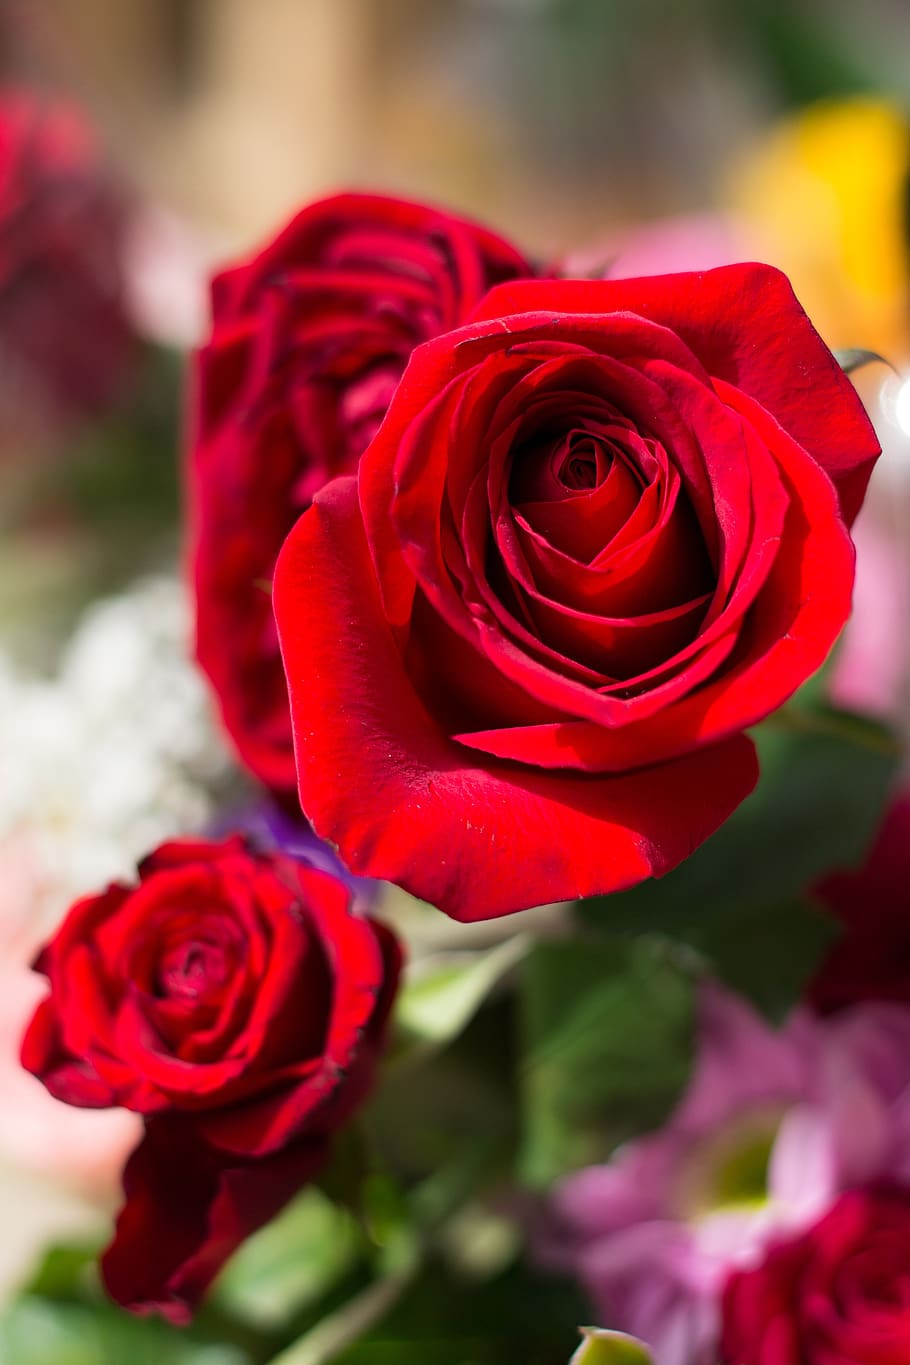 red rose, ro, flower, nature, flowering plant, rose, rose - flower, beauty in nature, red, vulnerability